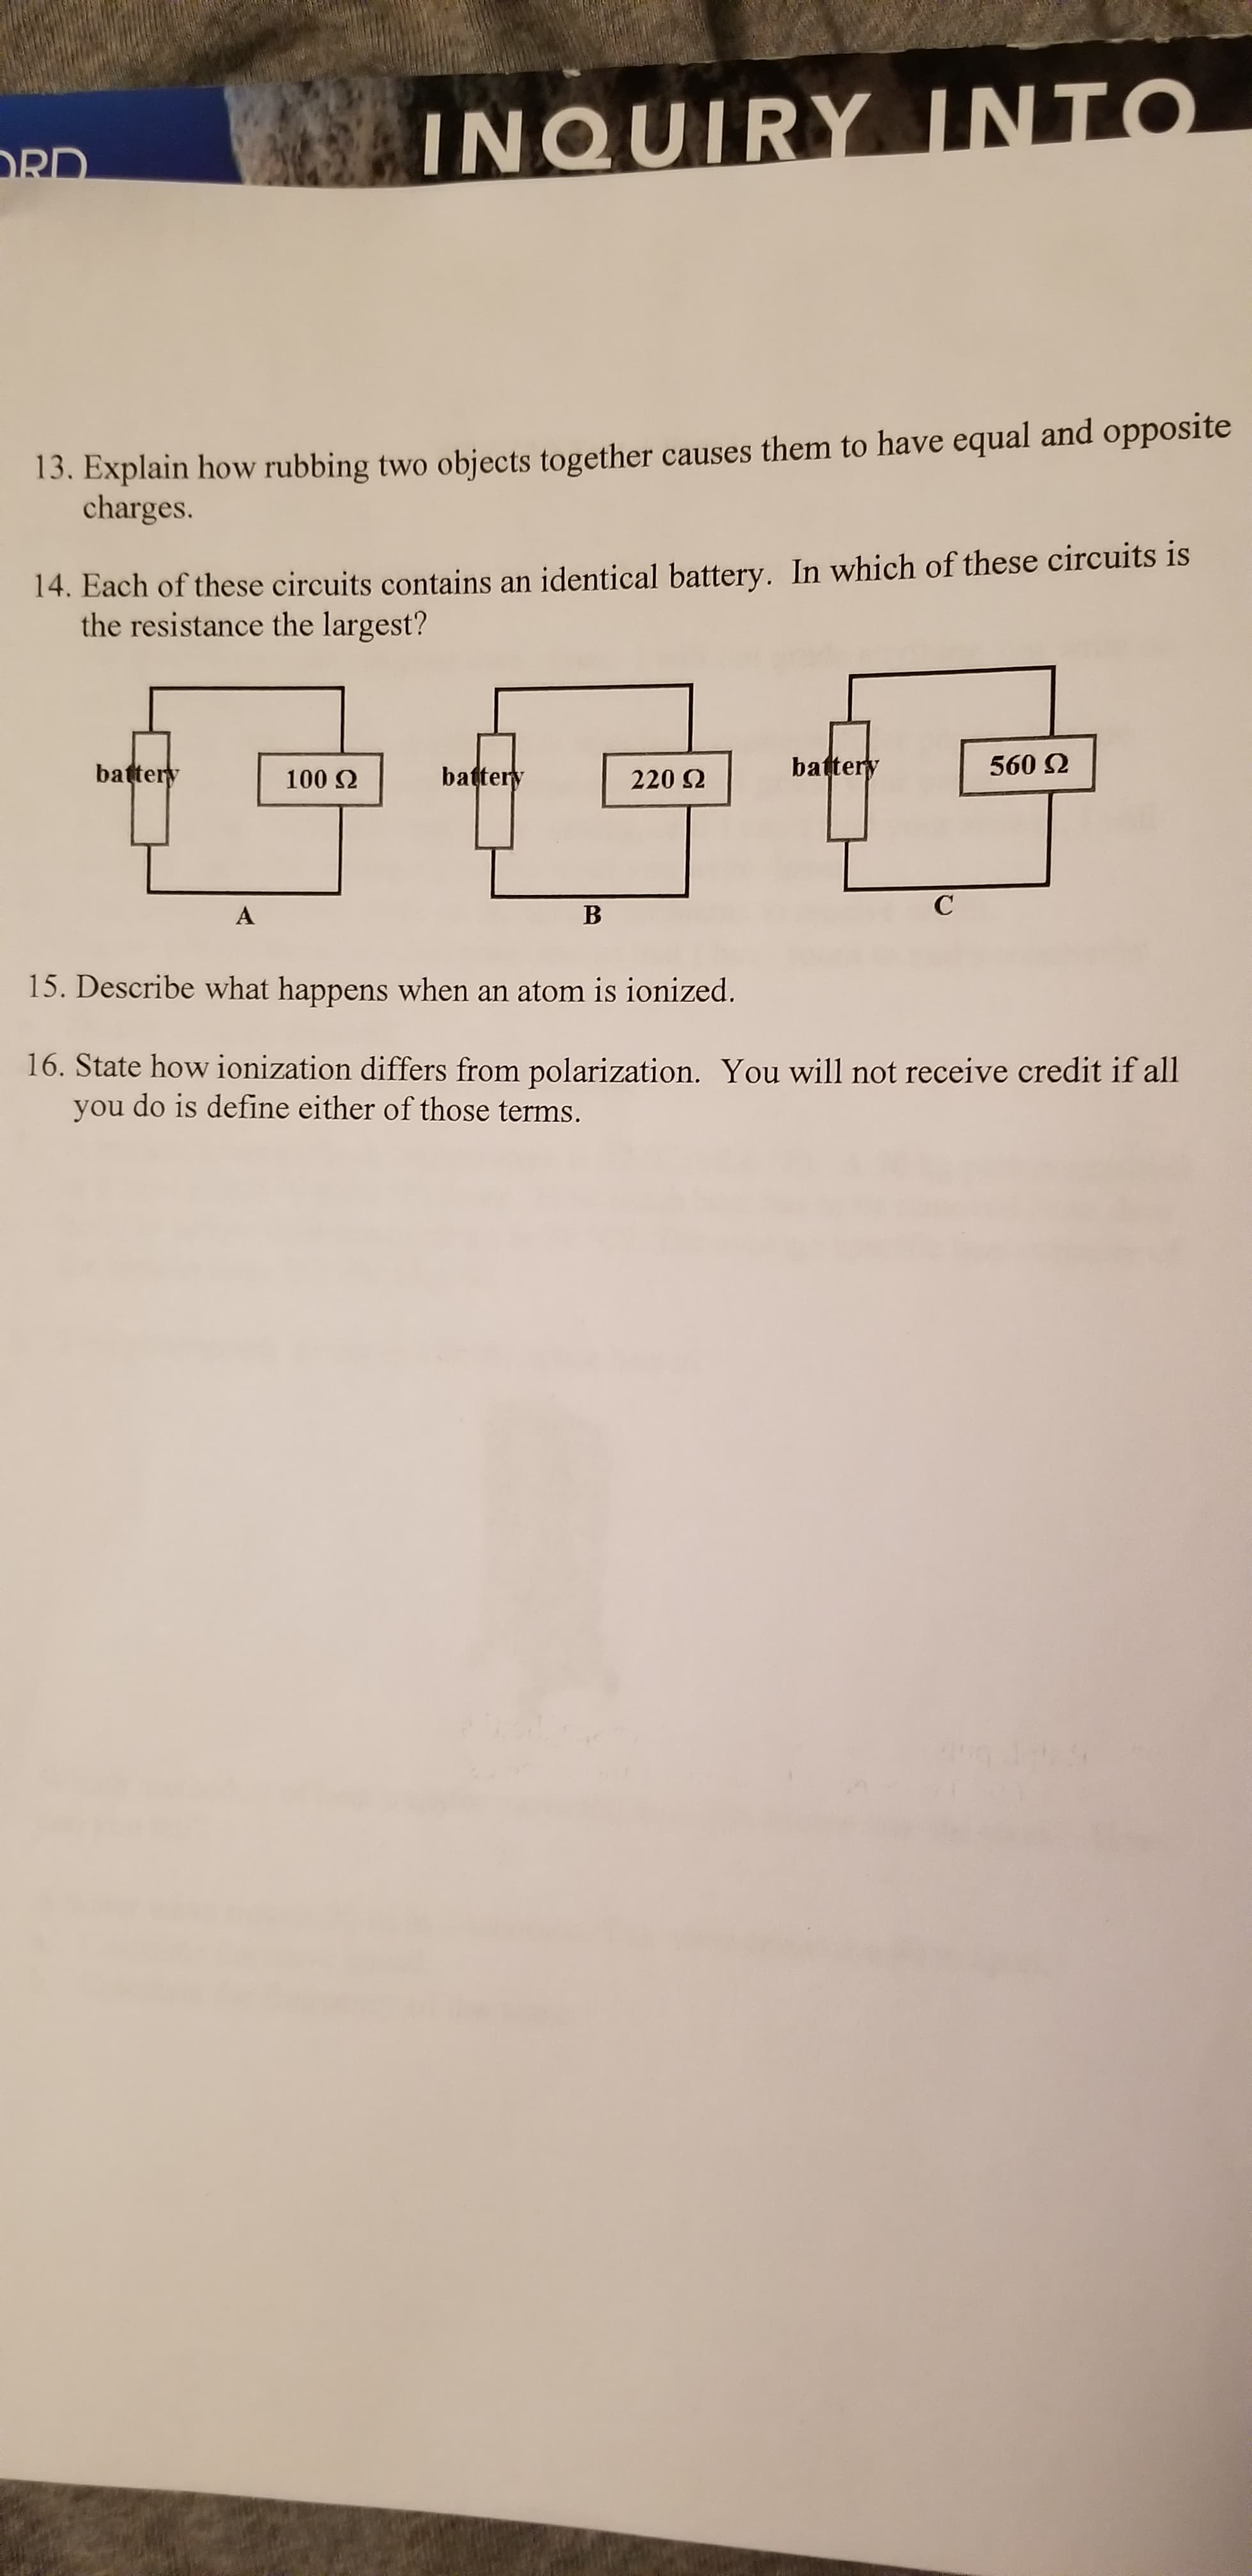 INQUIRY INTO
RD
13. Explain how rubbing two objects together causes them to have equal and opposite
charges.
14. Each of these circuits contains an identical battery. In which of these circuits is
the resistance the largest?
battery
560 2
battery
battery
100 Q
220 2
С
В
A
15. Describe what happens when an atom is ionized.
16. State how ionization differs from polarization. You will not receive credit if all
do is define either of those terms.
you
